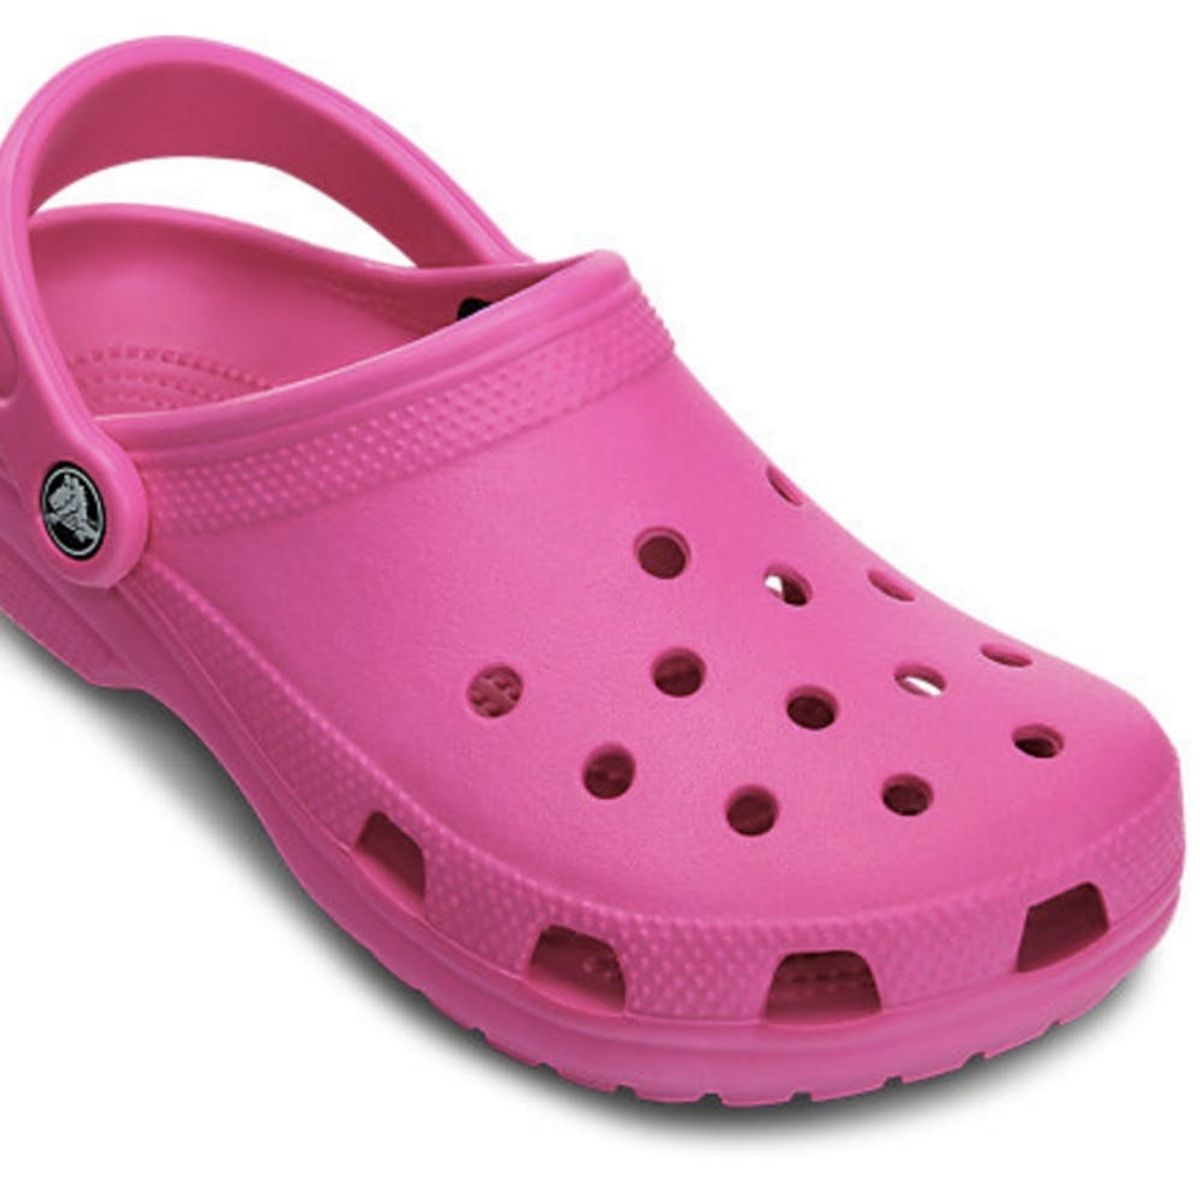 This Is the Reason Doctors Hate Your Crocs